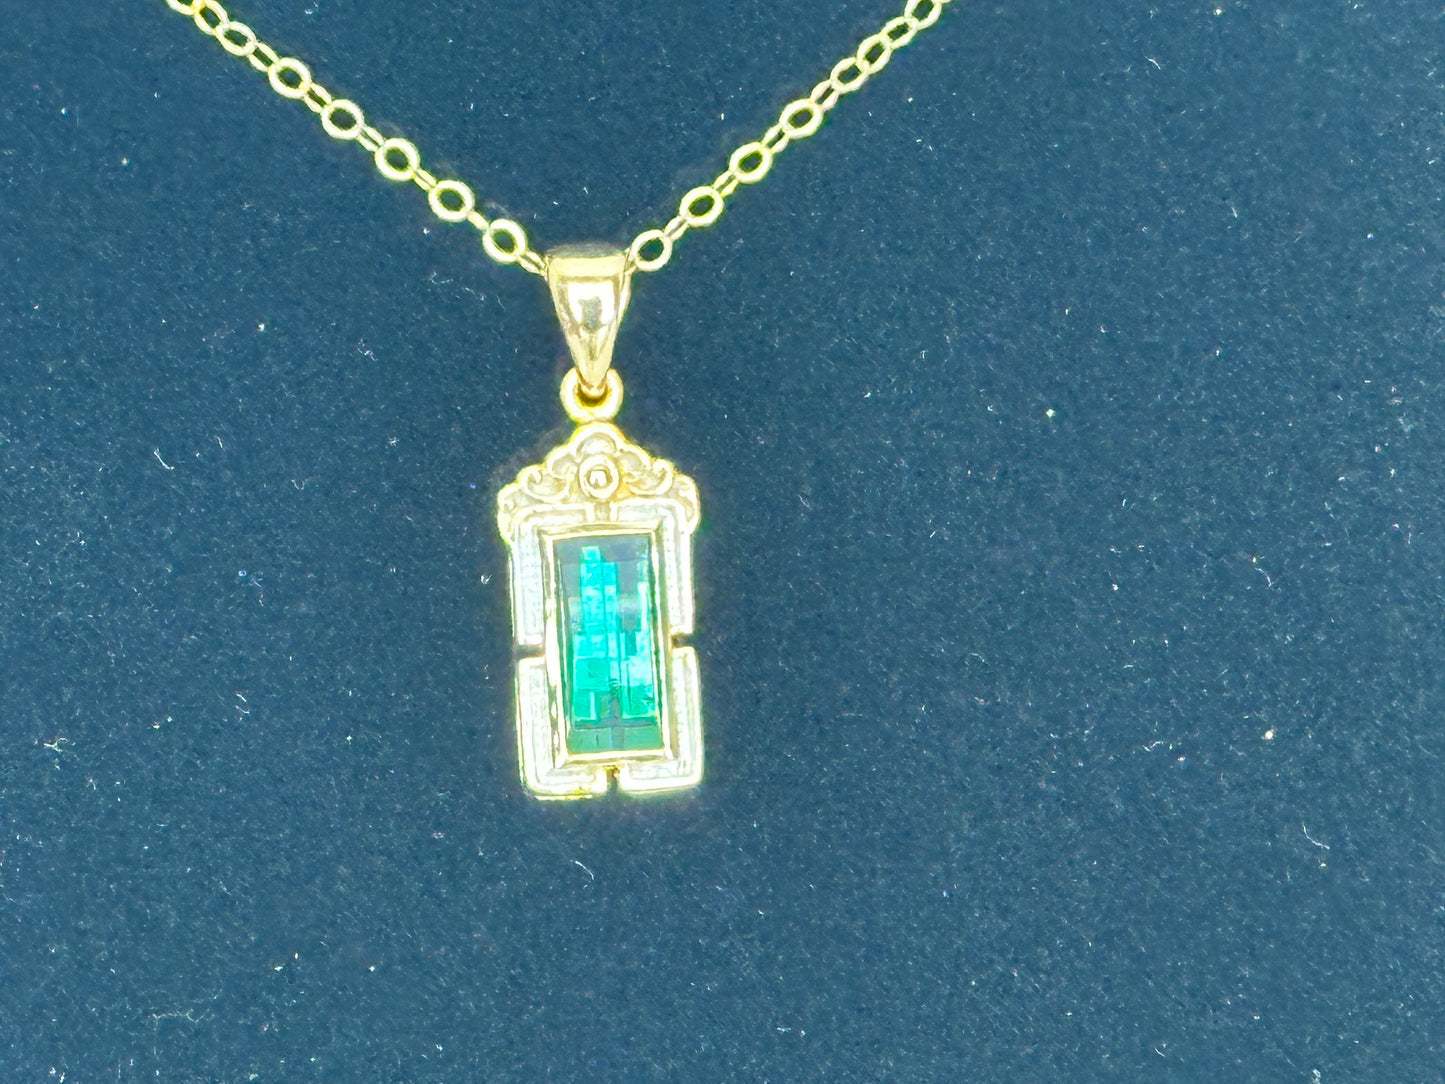 A blue/green Tourmaline mounted in a hand crafted 14K Gold pendant